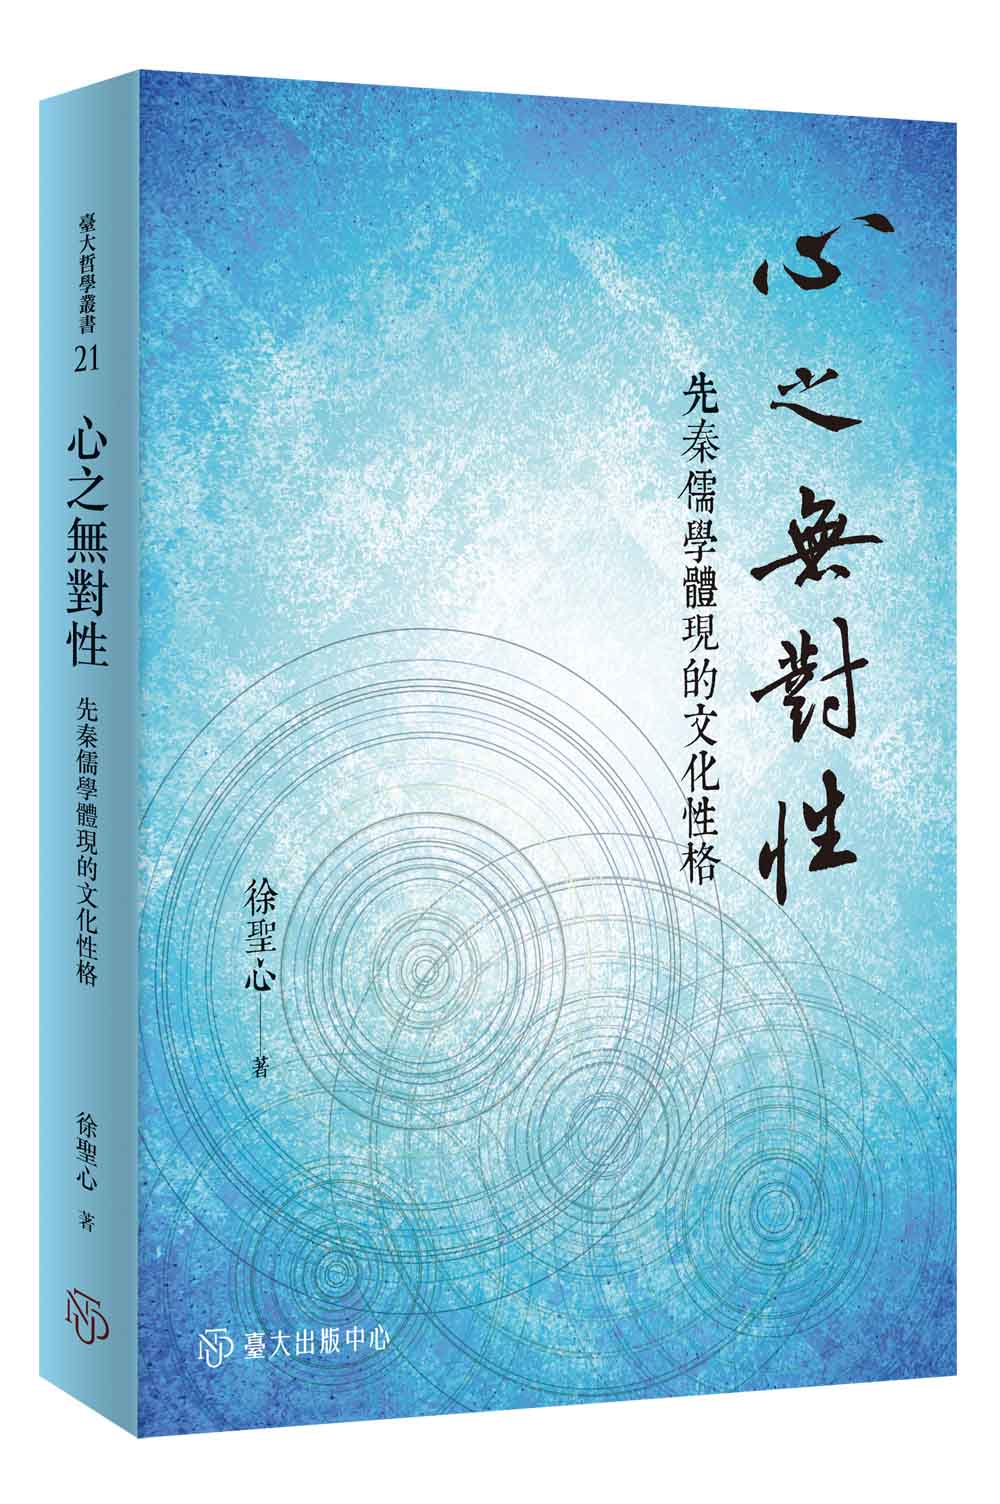 Non-oppositeness of Hsin: The Character of Culture that Confucian Performs in Pre-Chin